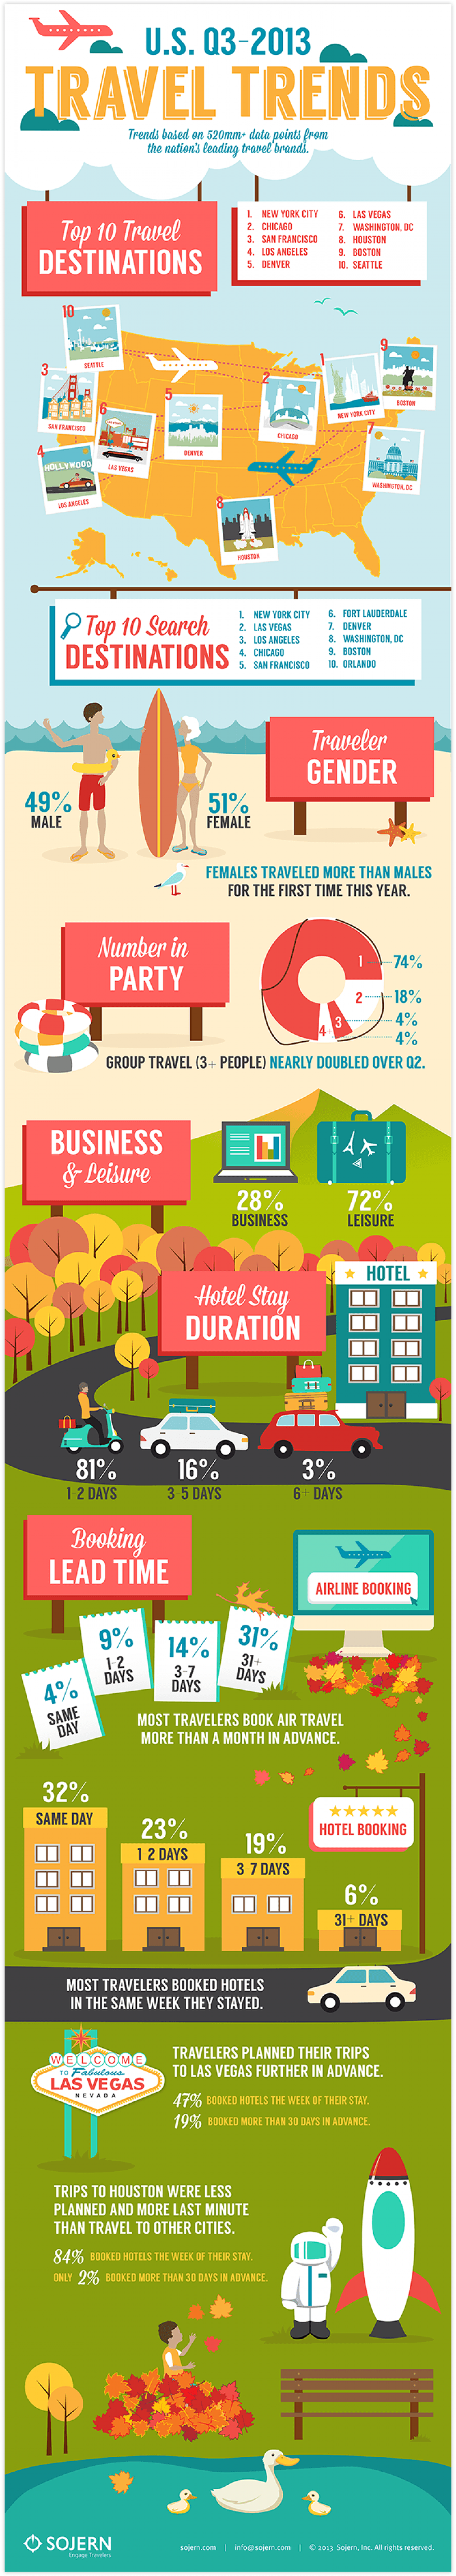 Infographic: Young Adults Travel a Lot and Use Internet to Plan Trips | Travel Moments In Time